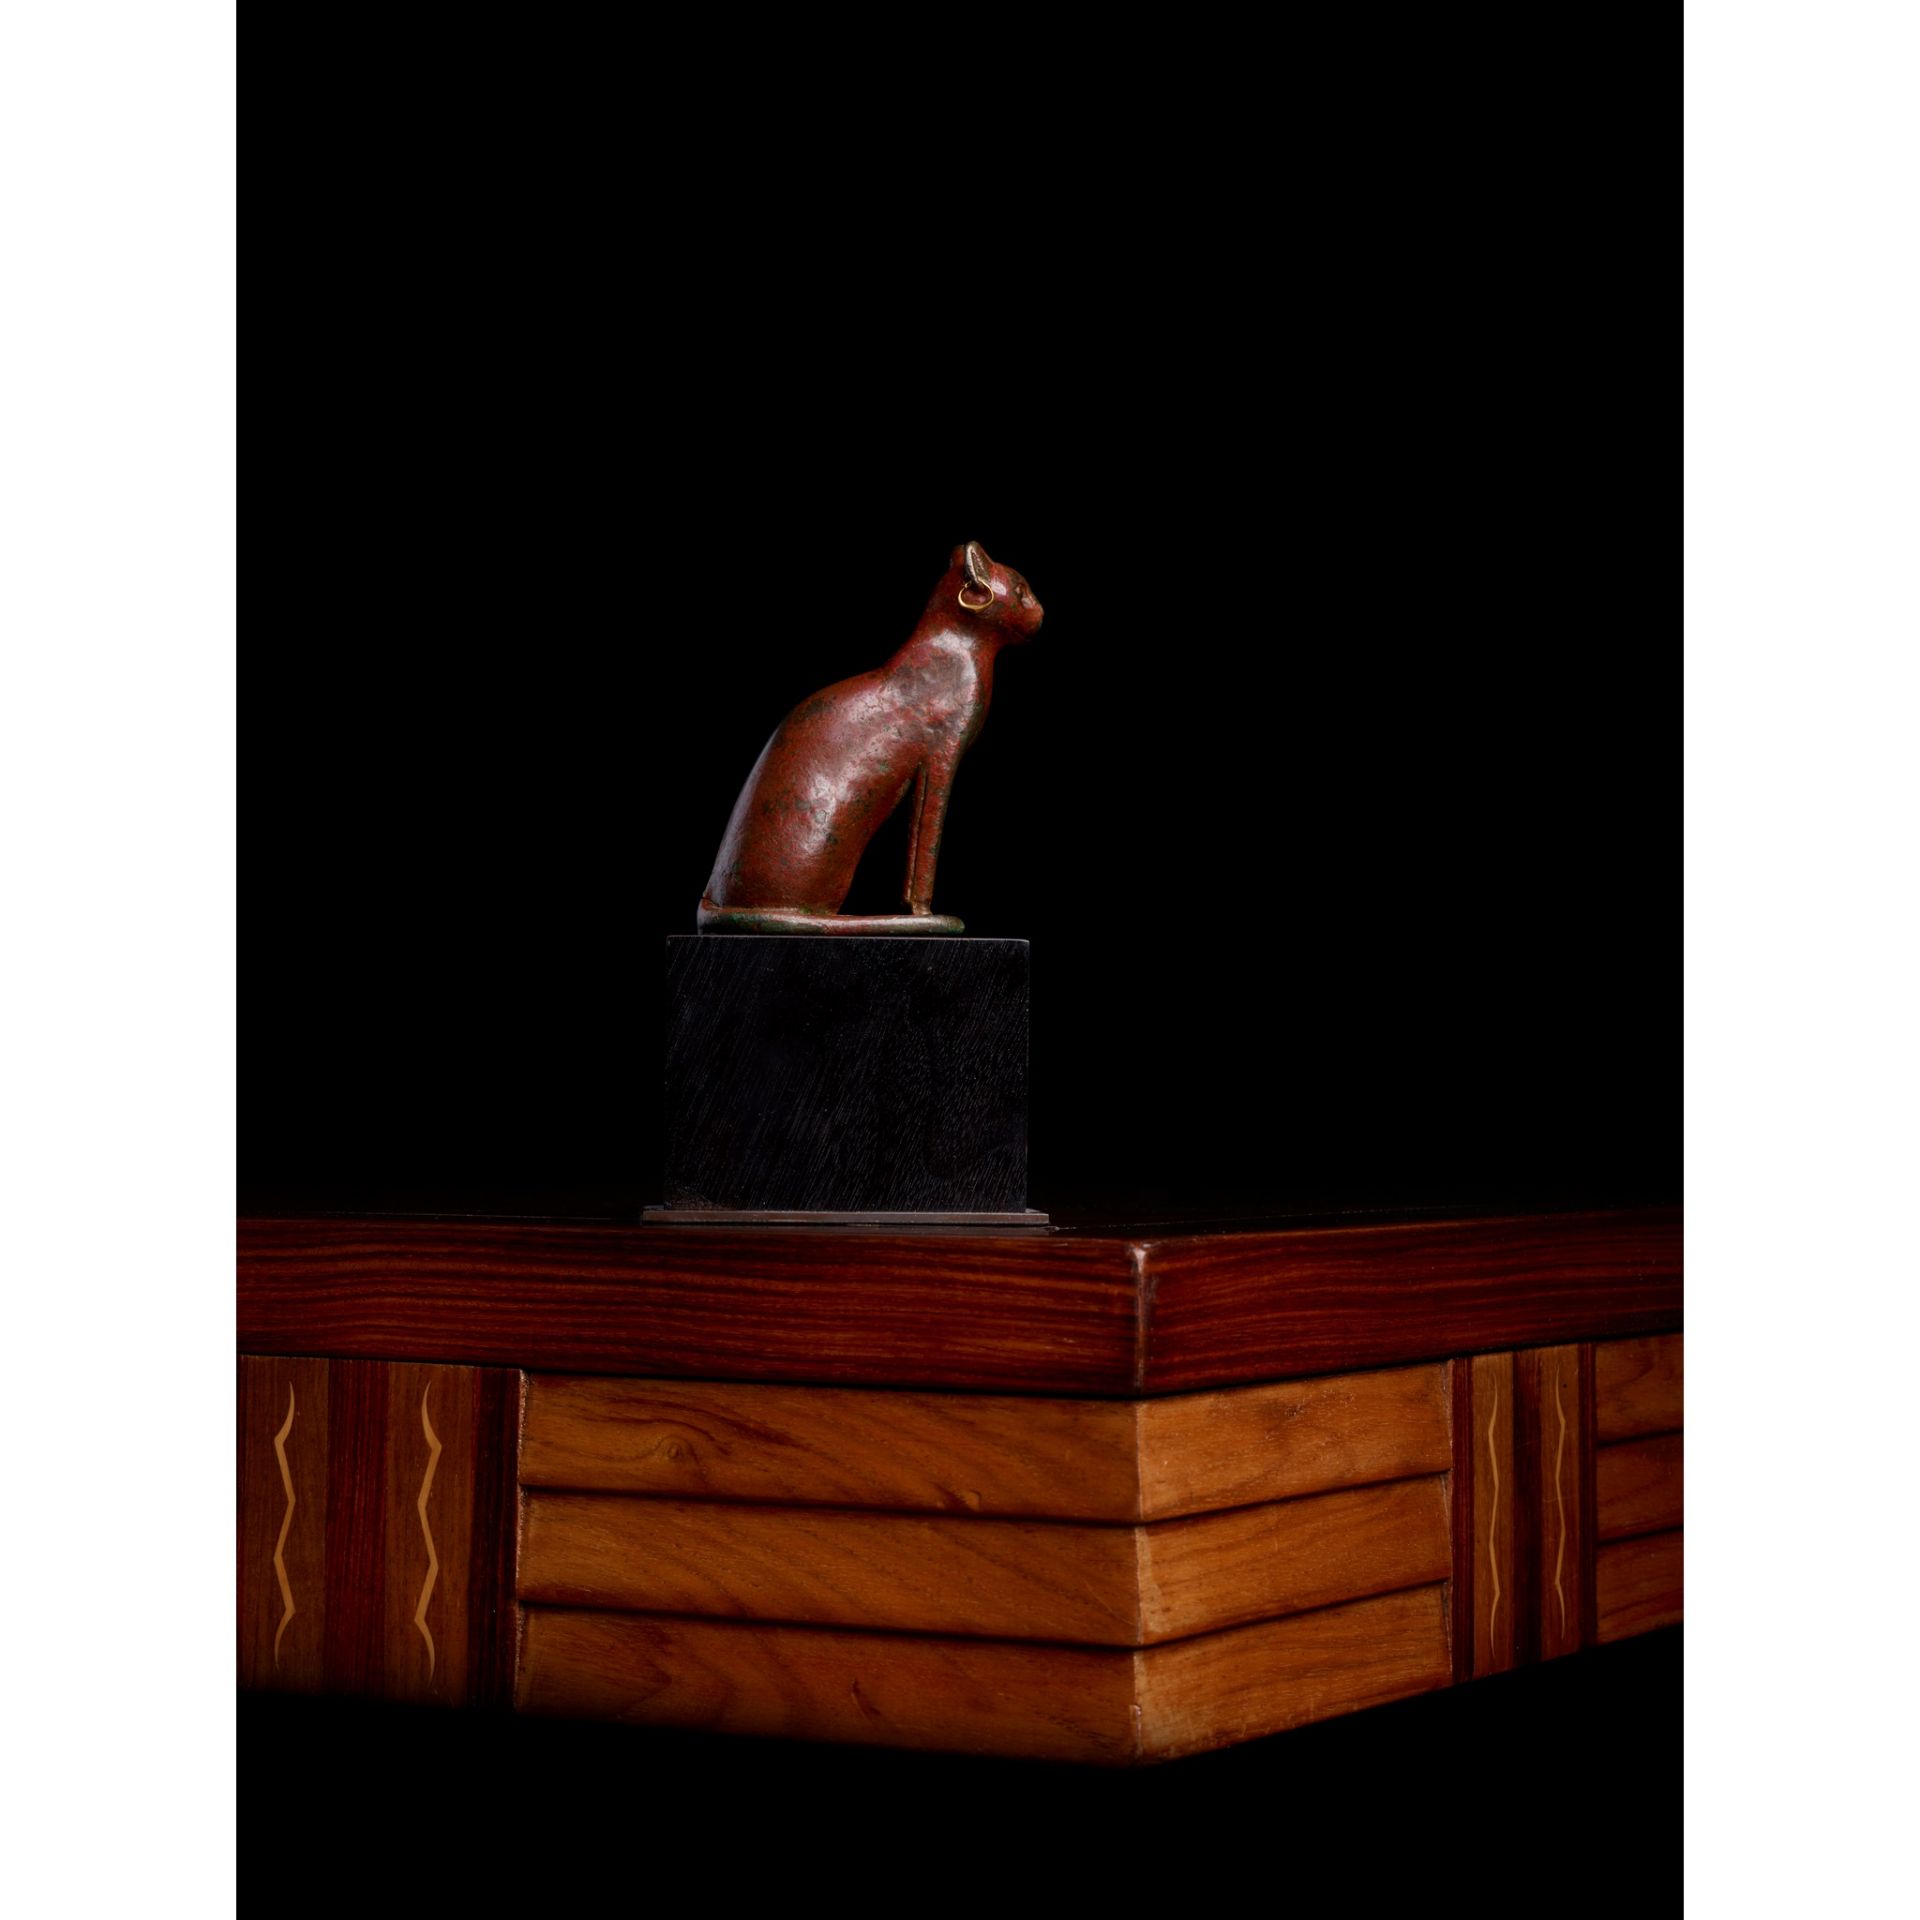 ANCIENT EGYPTIAN BRONZE CAT EGYPT, 21ST - 26TH DYNASTY, c. 1075-525 B.C. - Image 3 of 3